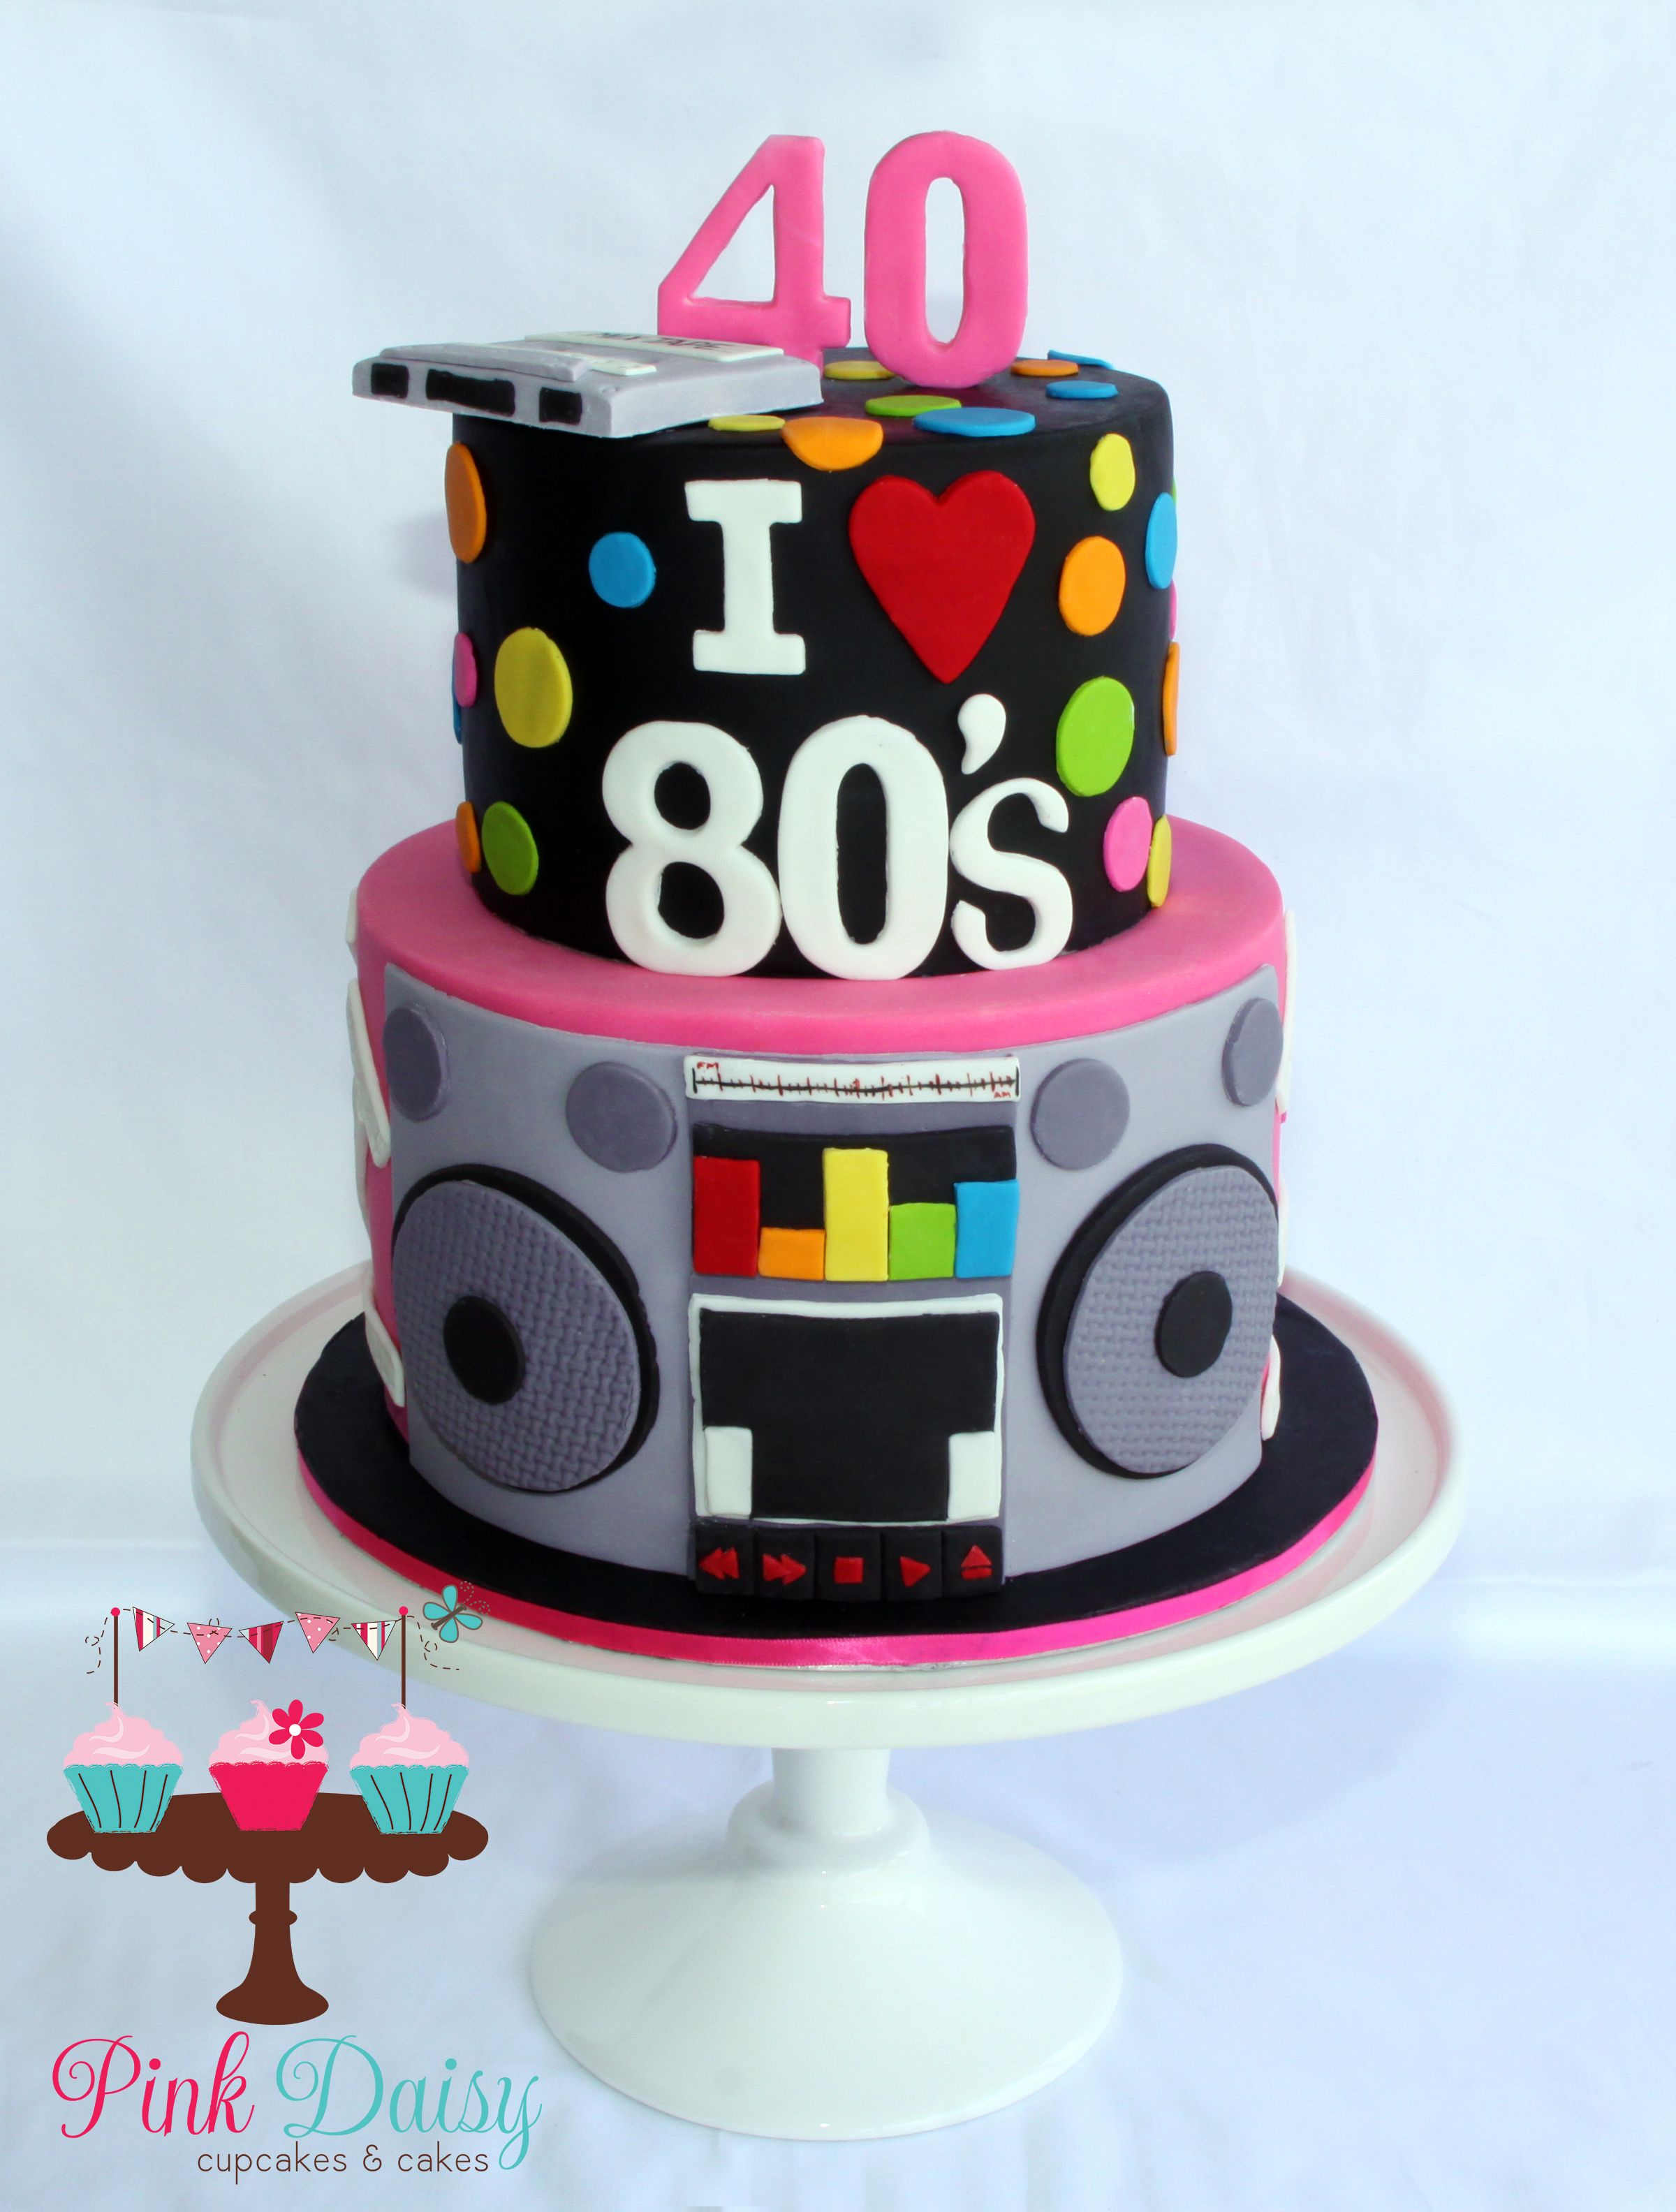 80S Birthday Cake Salute To The 80s 16th Birthday Cake 80s Party Pinterest